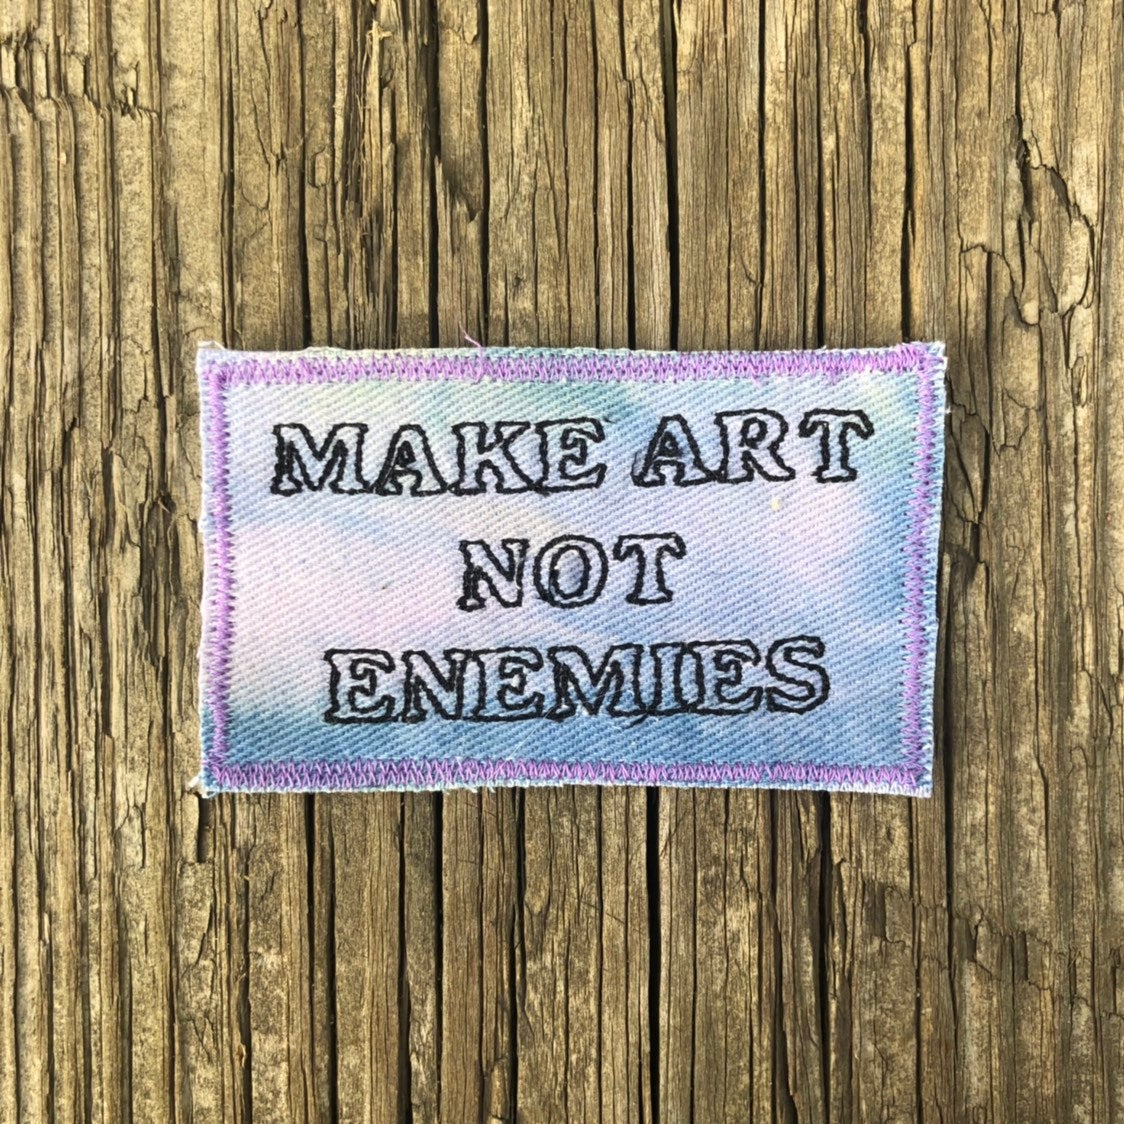 Make Art Not Enemies. Handmade Embroidered Canvas Patch